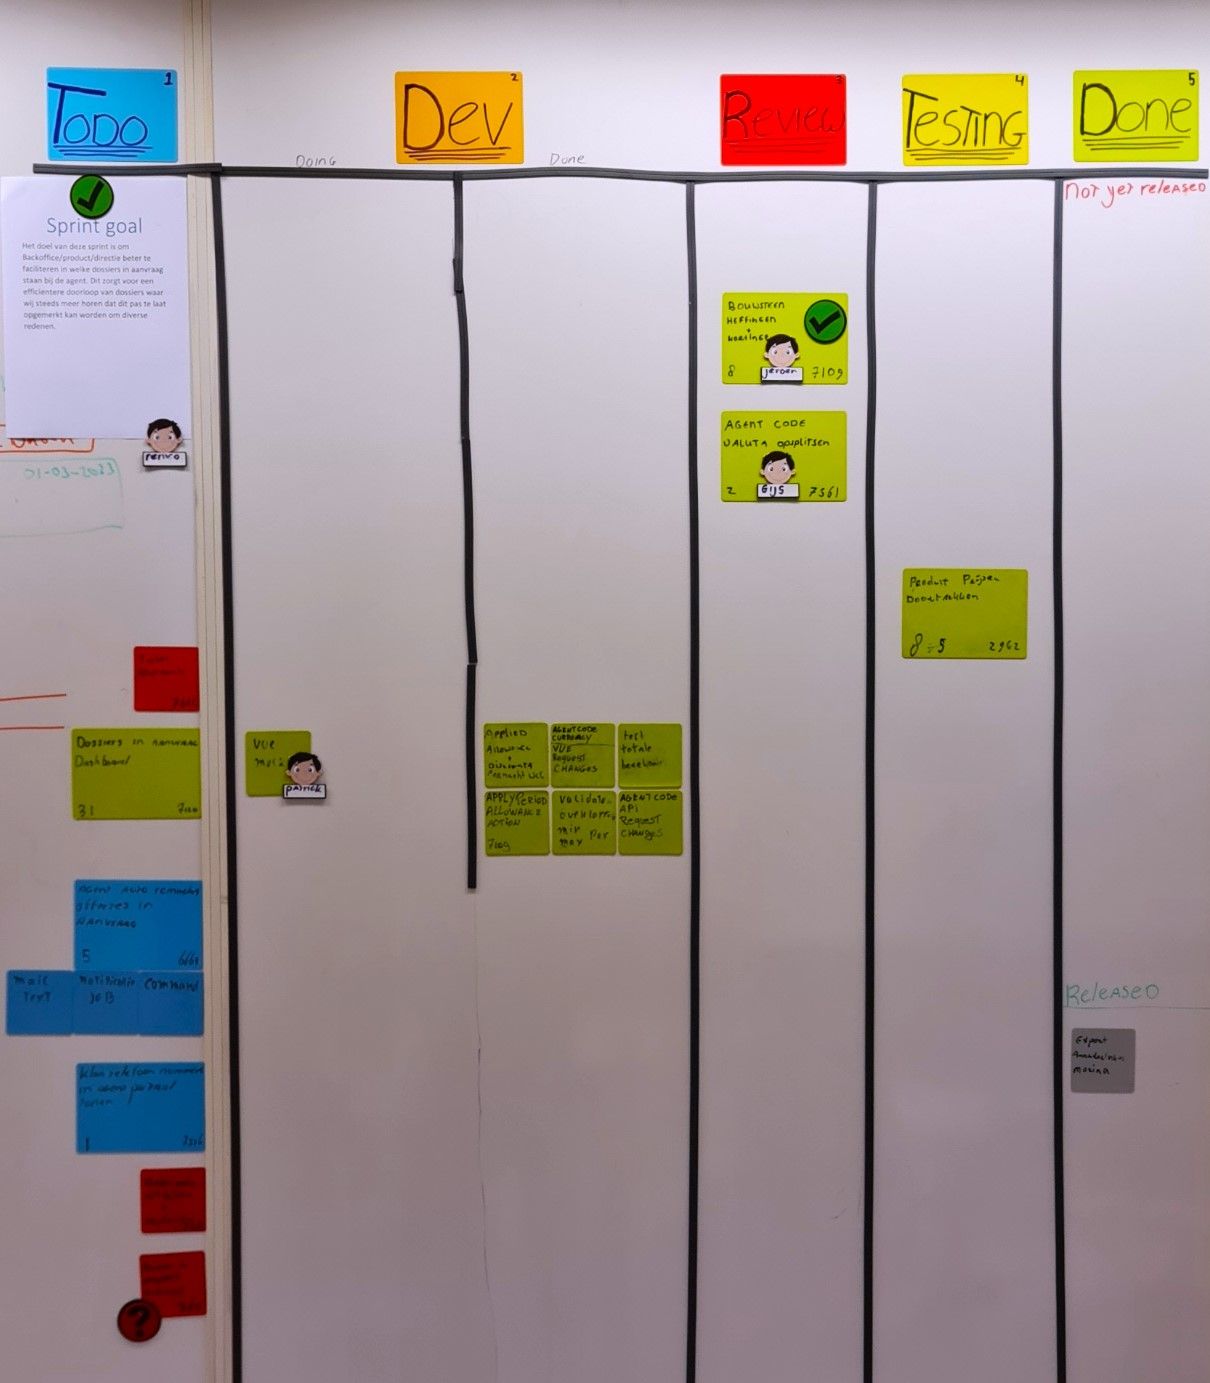 A journey into visual Scrum